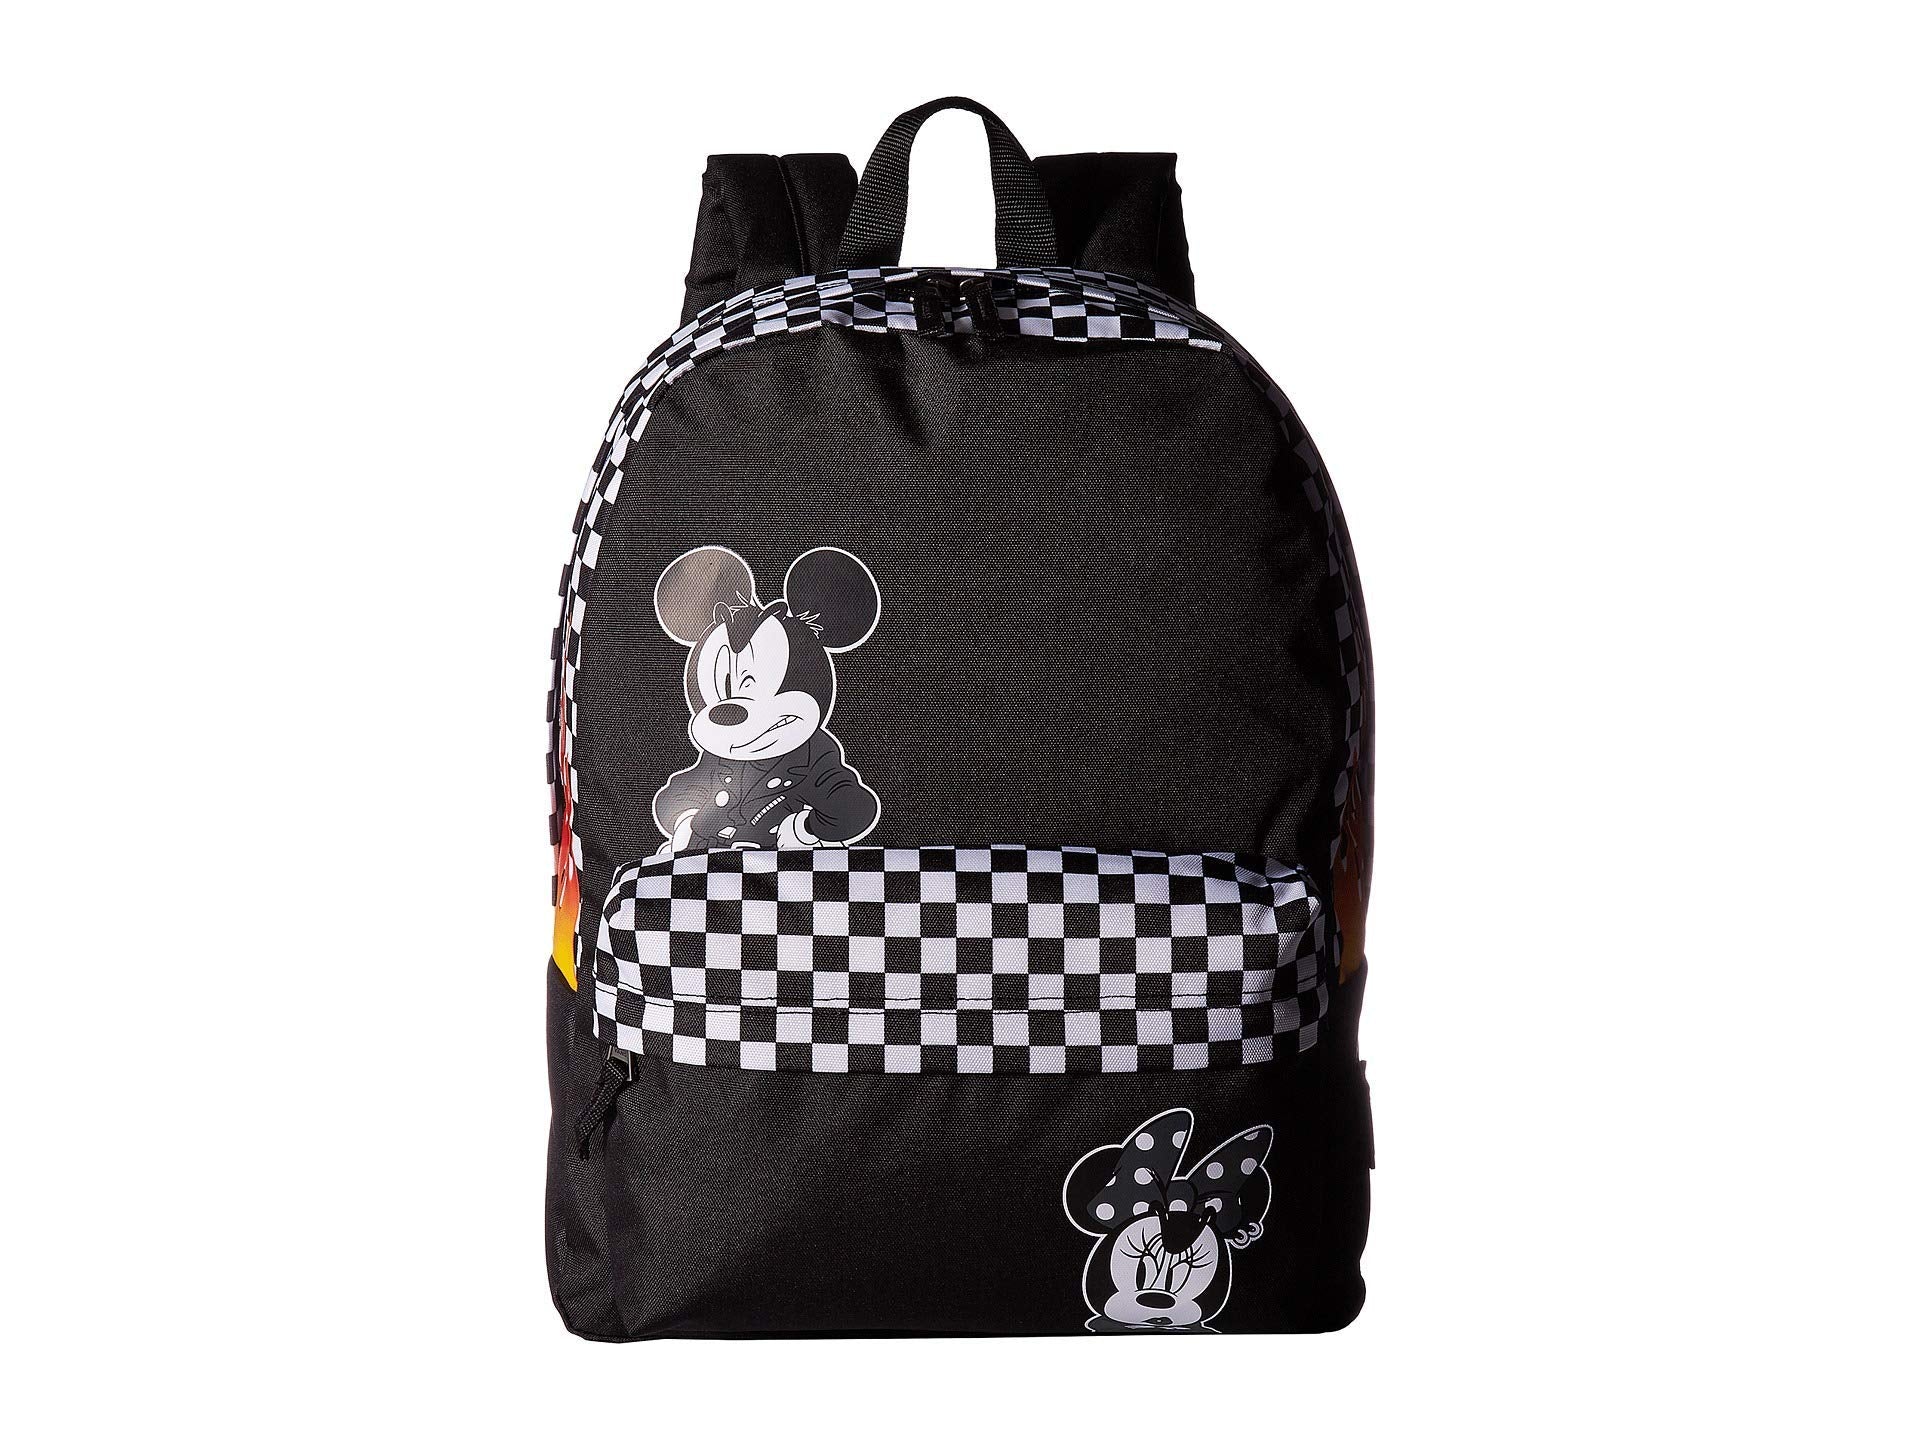 Vans x Disney Mouse 90th Anniversary Realm backpacks4less.com